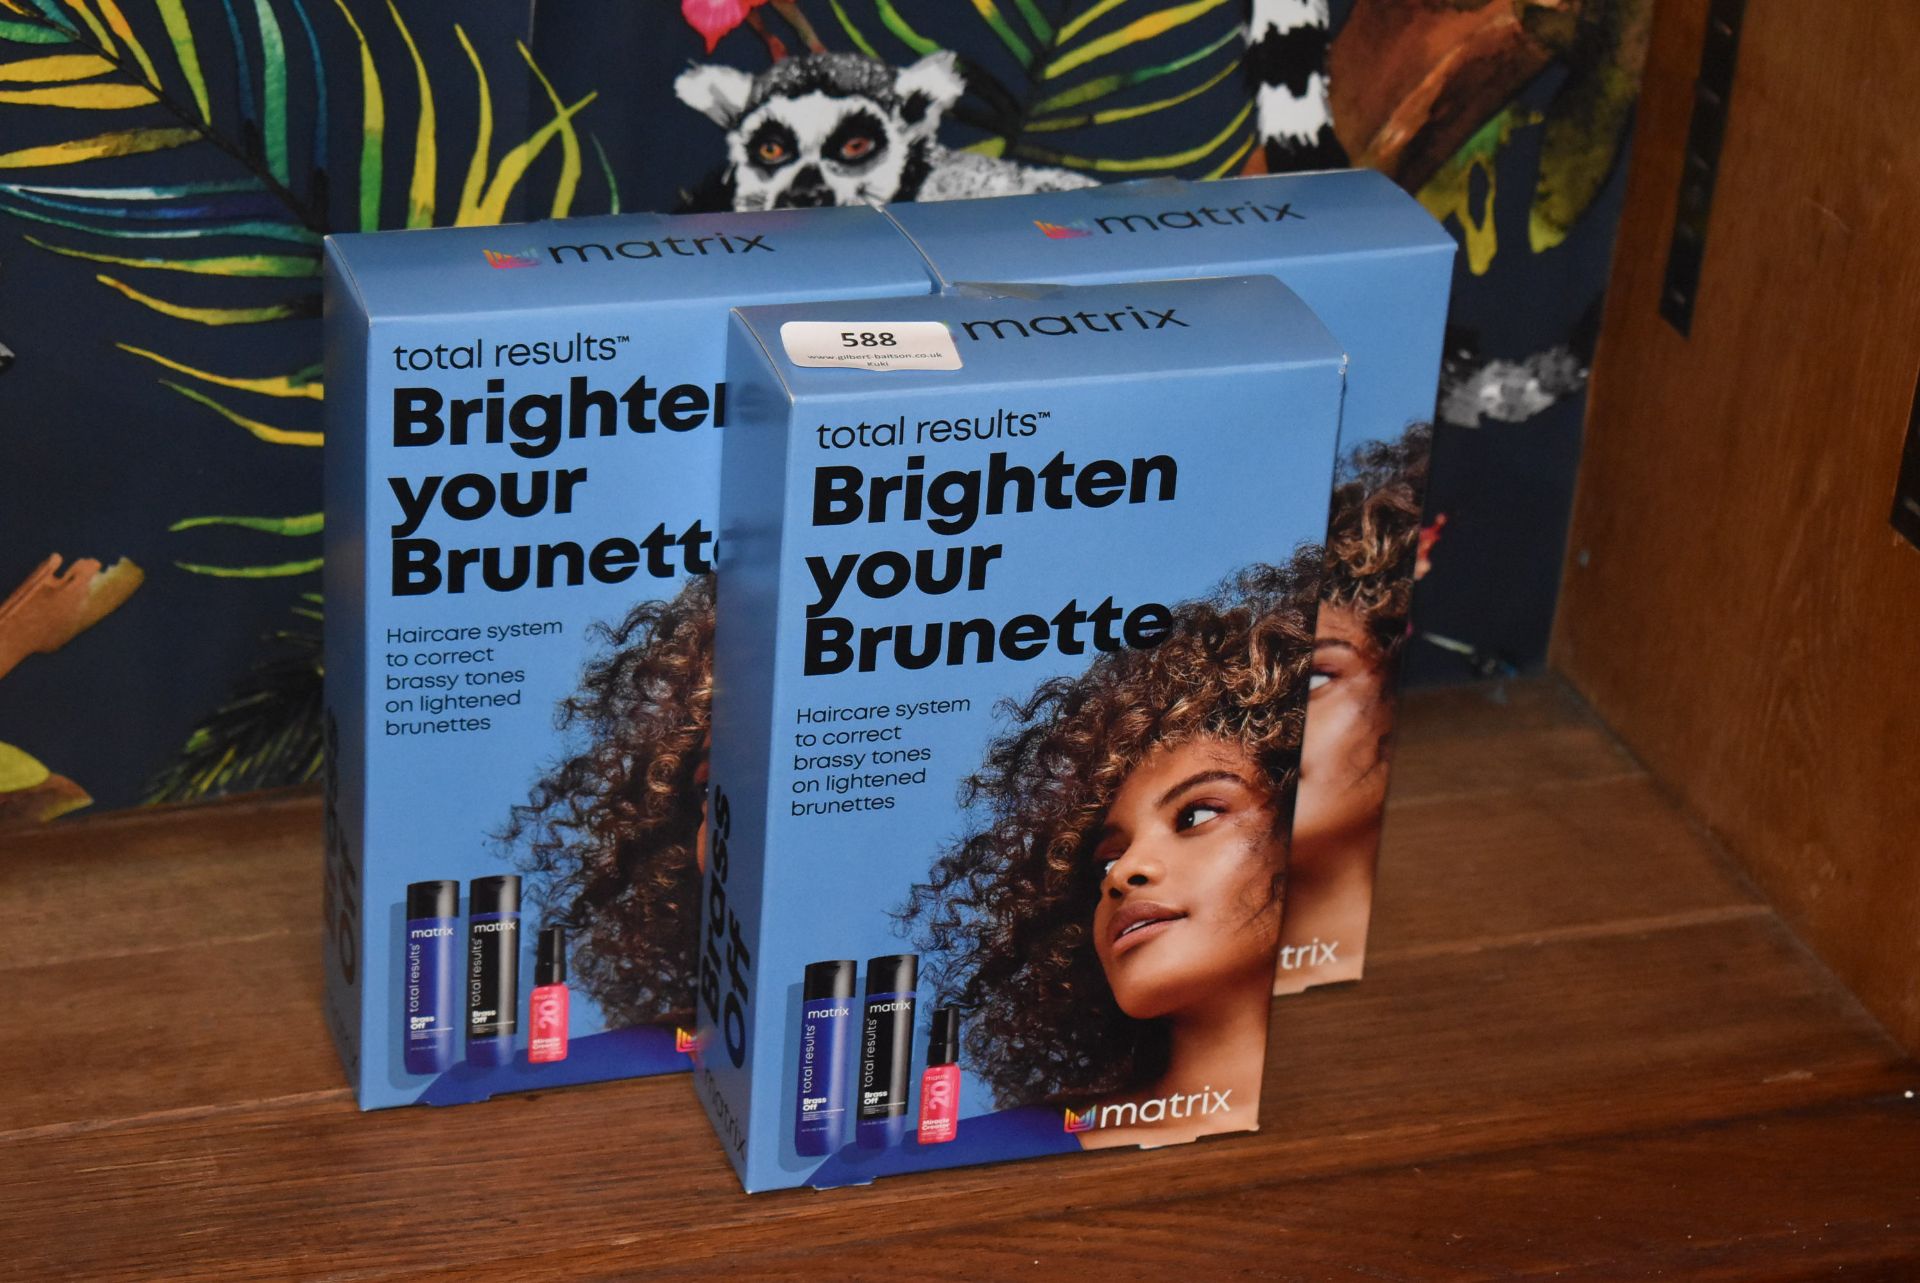 *Three Matrix Total Results Brighten Your Brunette Hair Care Systems